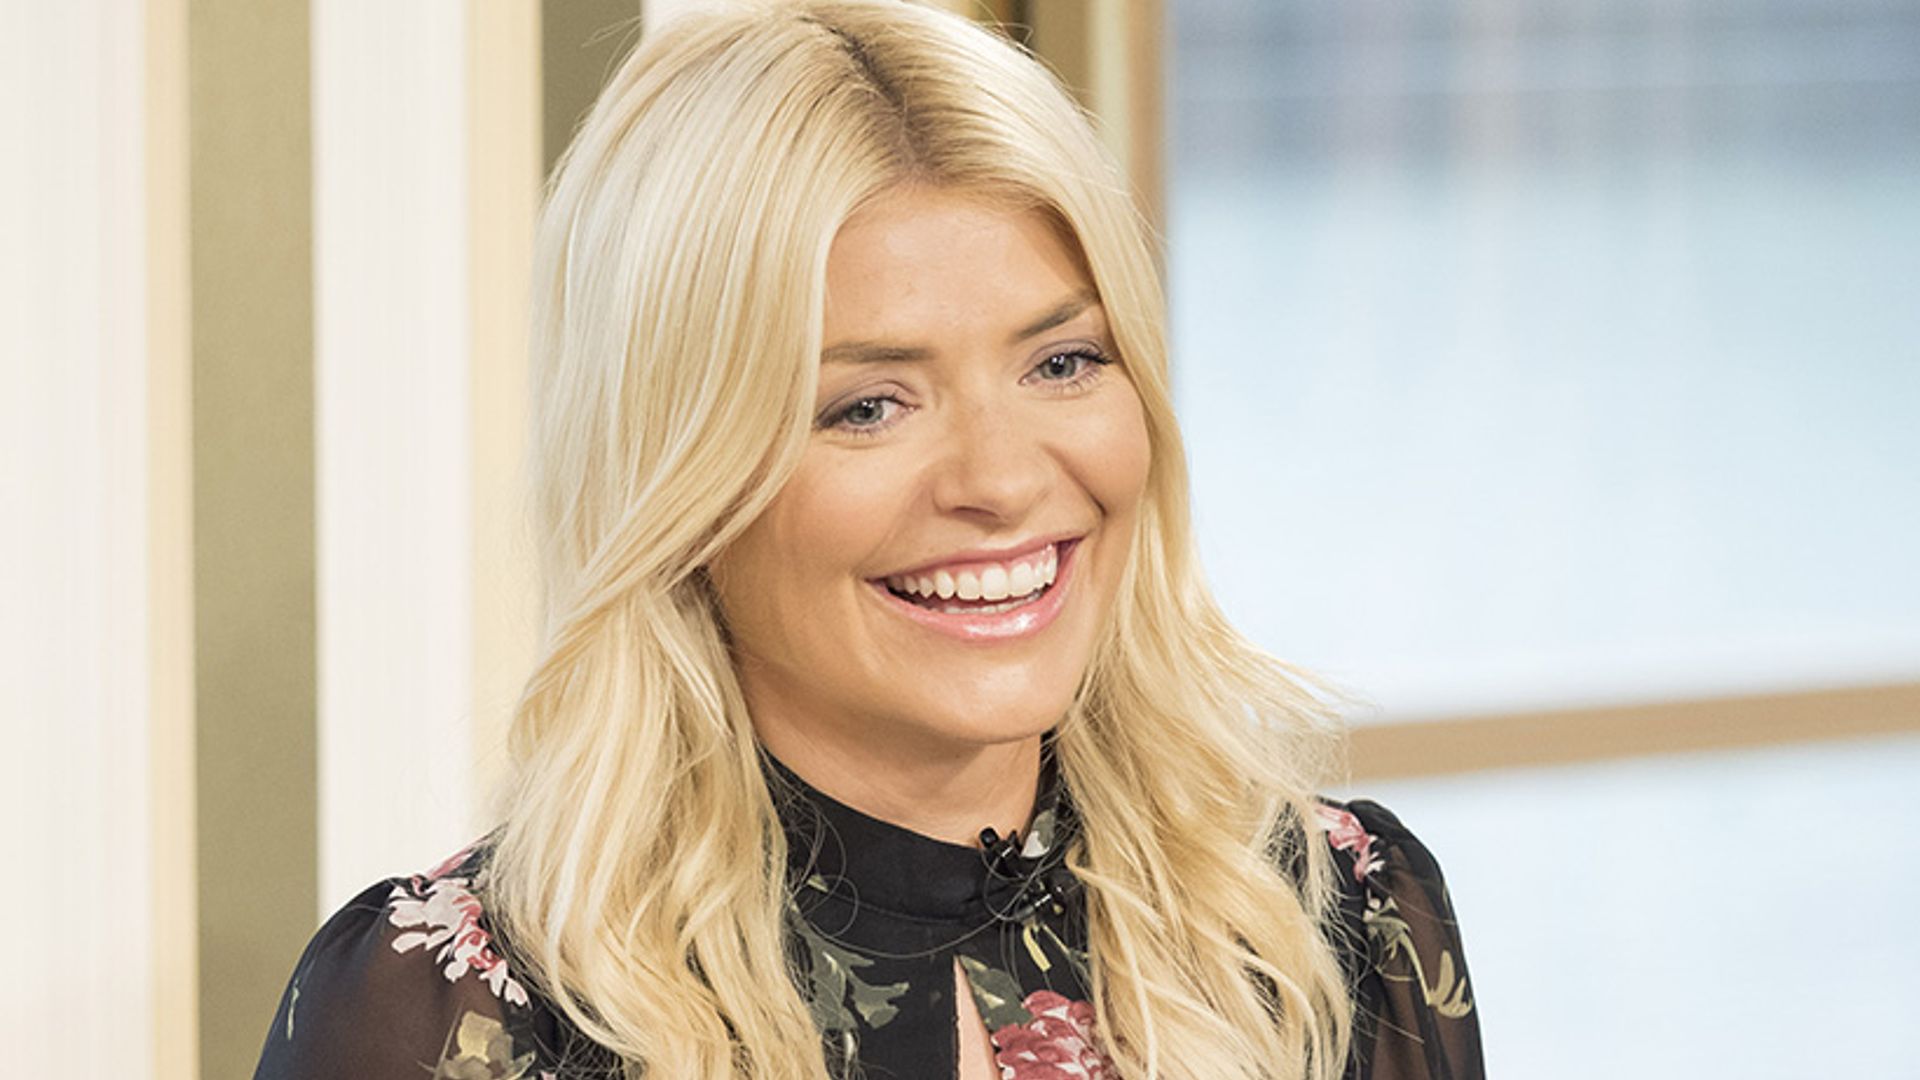 Holly Willoughby shares adorable photo of fun day with her children – see the snap!